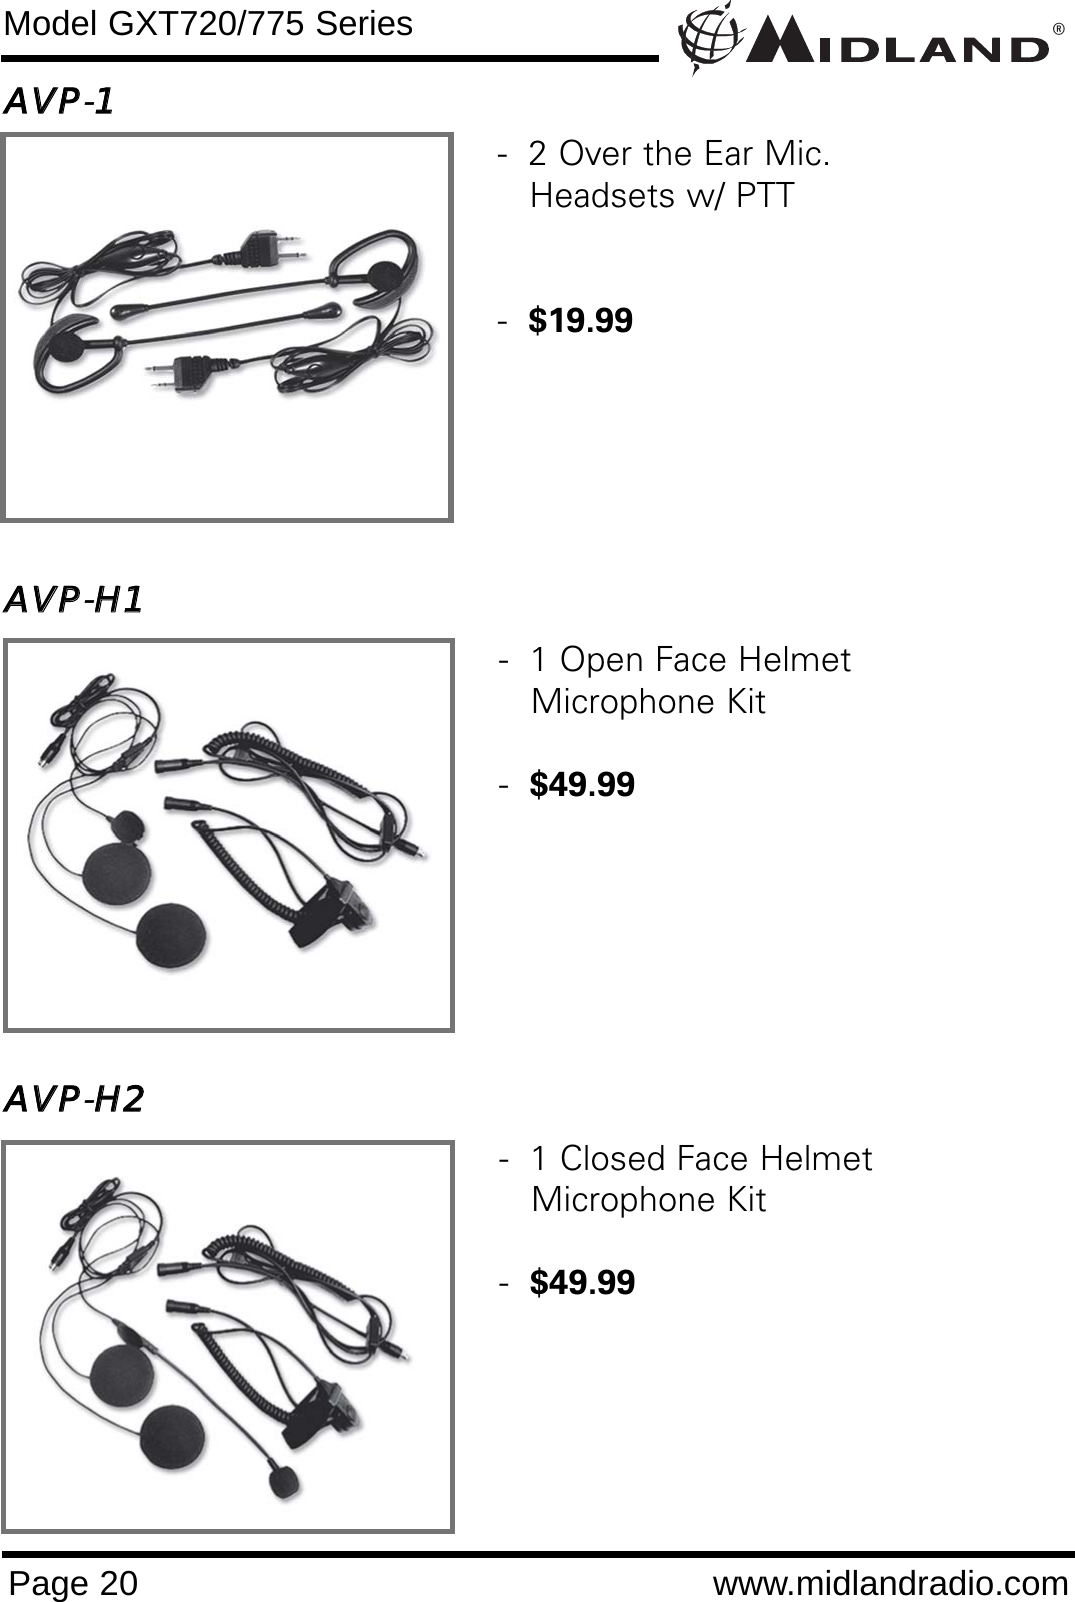 AAVVPP-11AAVVPP-HH11AAVVPP-HH22®Page 20 www.midlandradio.comModel GXT720/775 Series-  1 Open Face Helmet Microphone Kit-  $49.99-  1 Closed Face HelmetMicrophone Kit-  $49.99-  2 Over the Ear Mic. Headsets w/ PTT-  $19.99